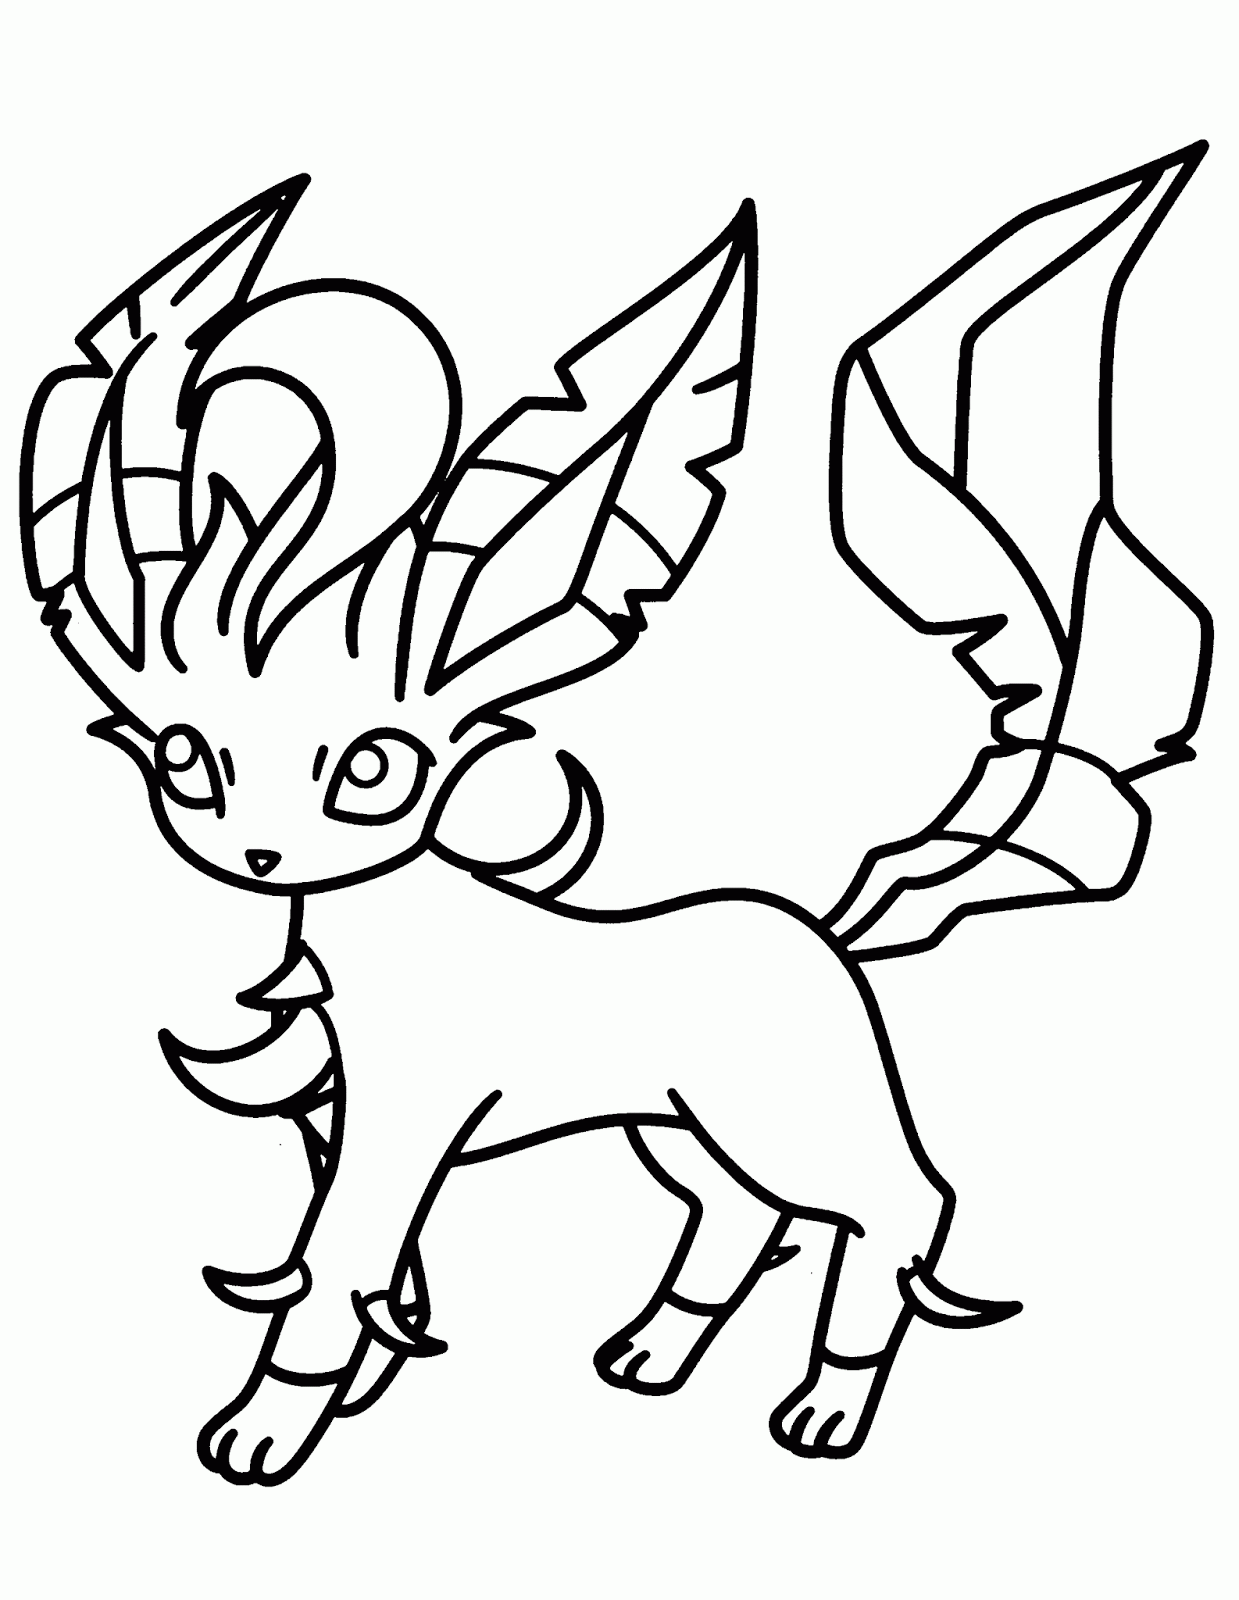 pokemon printable colouring pages coloring pages pokemon coloring pages free and printable pages pokemon printable colouring 